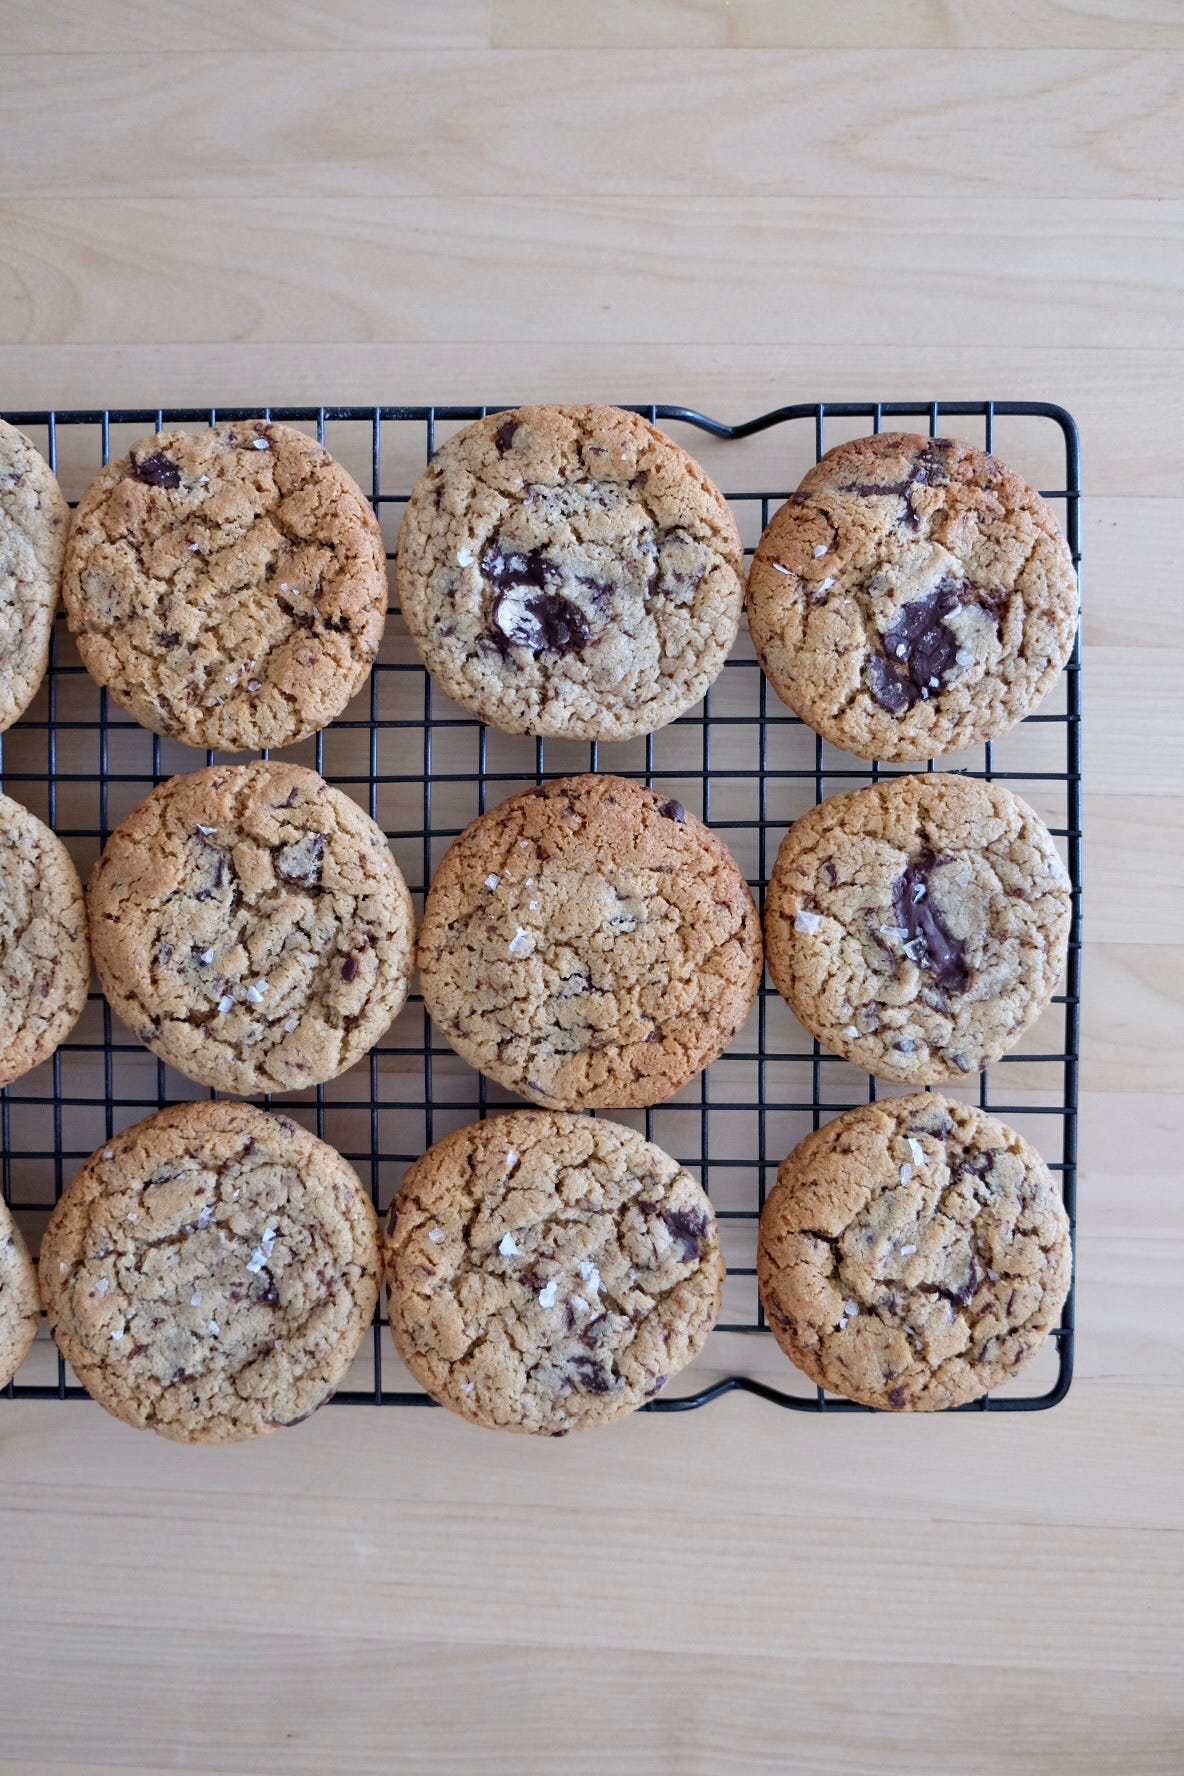 Wire tray of choc chip cookies with sea salt